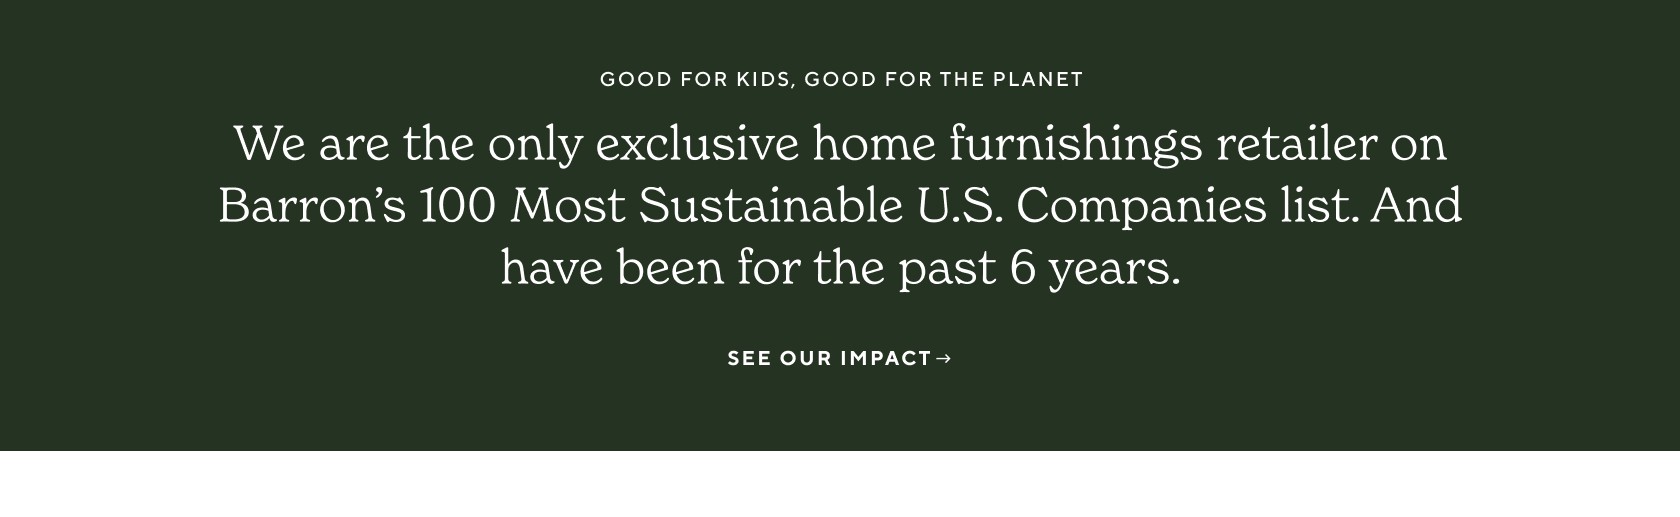 Good For Kids, Good For The Planet. See Our Impact